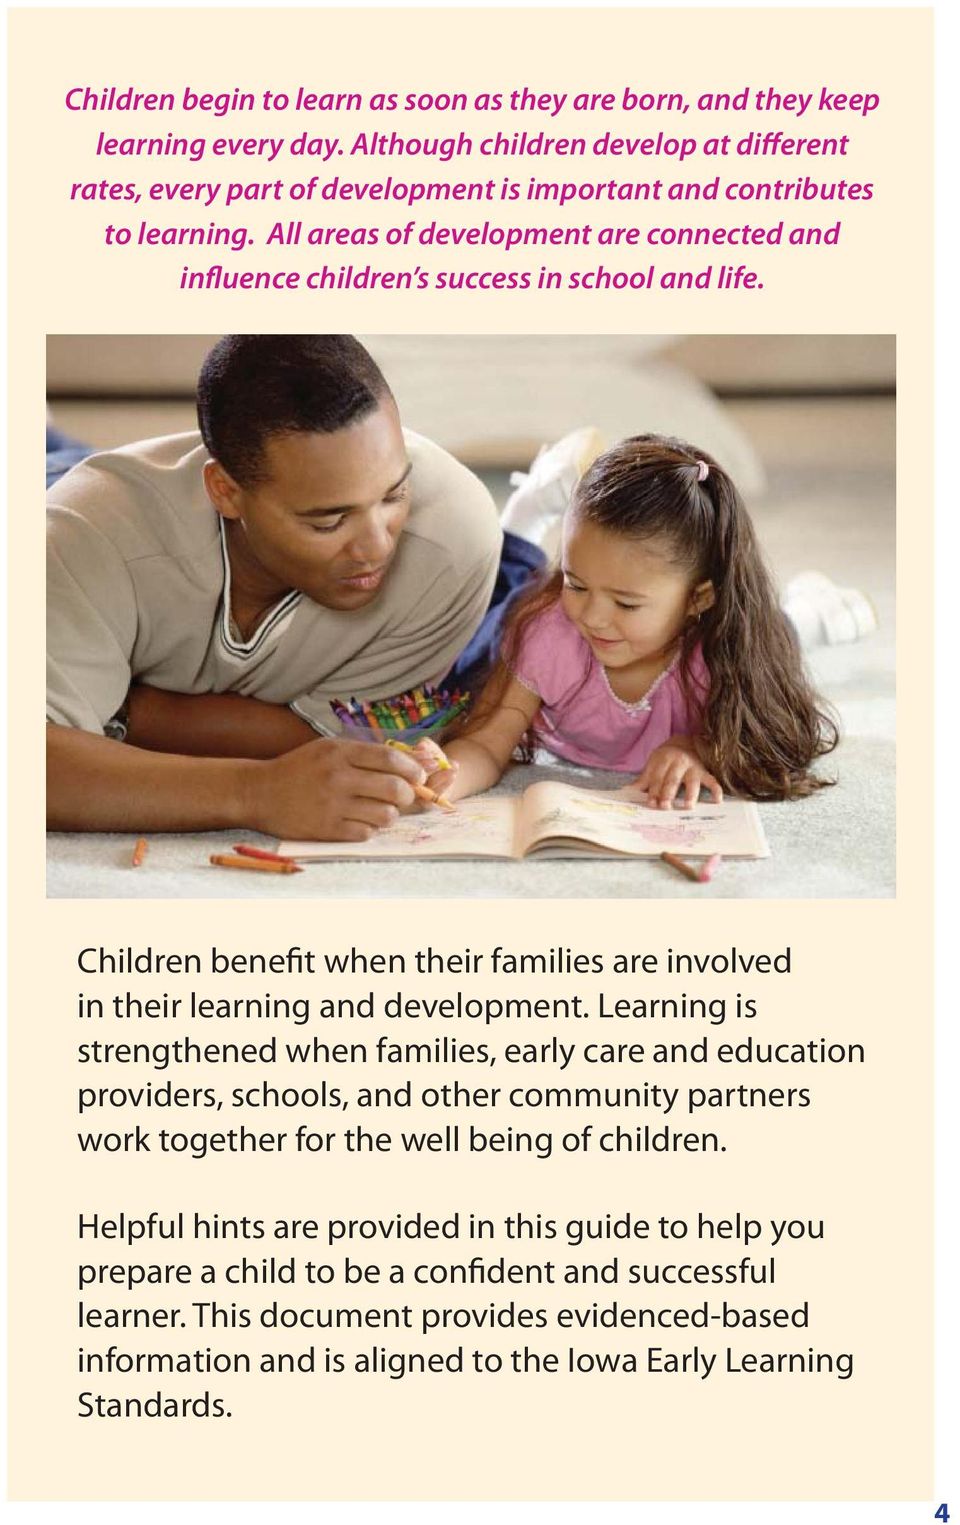 All areas of development are connected and influence children s success in school and life. Children benefit when their families are involved in their learning and development.